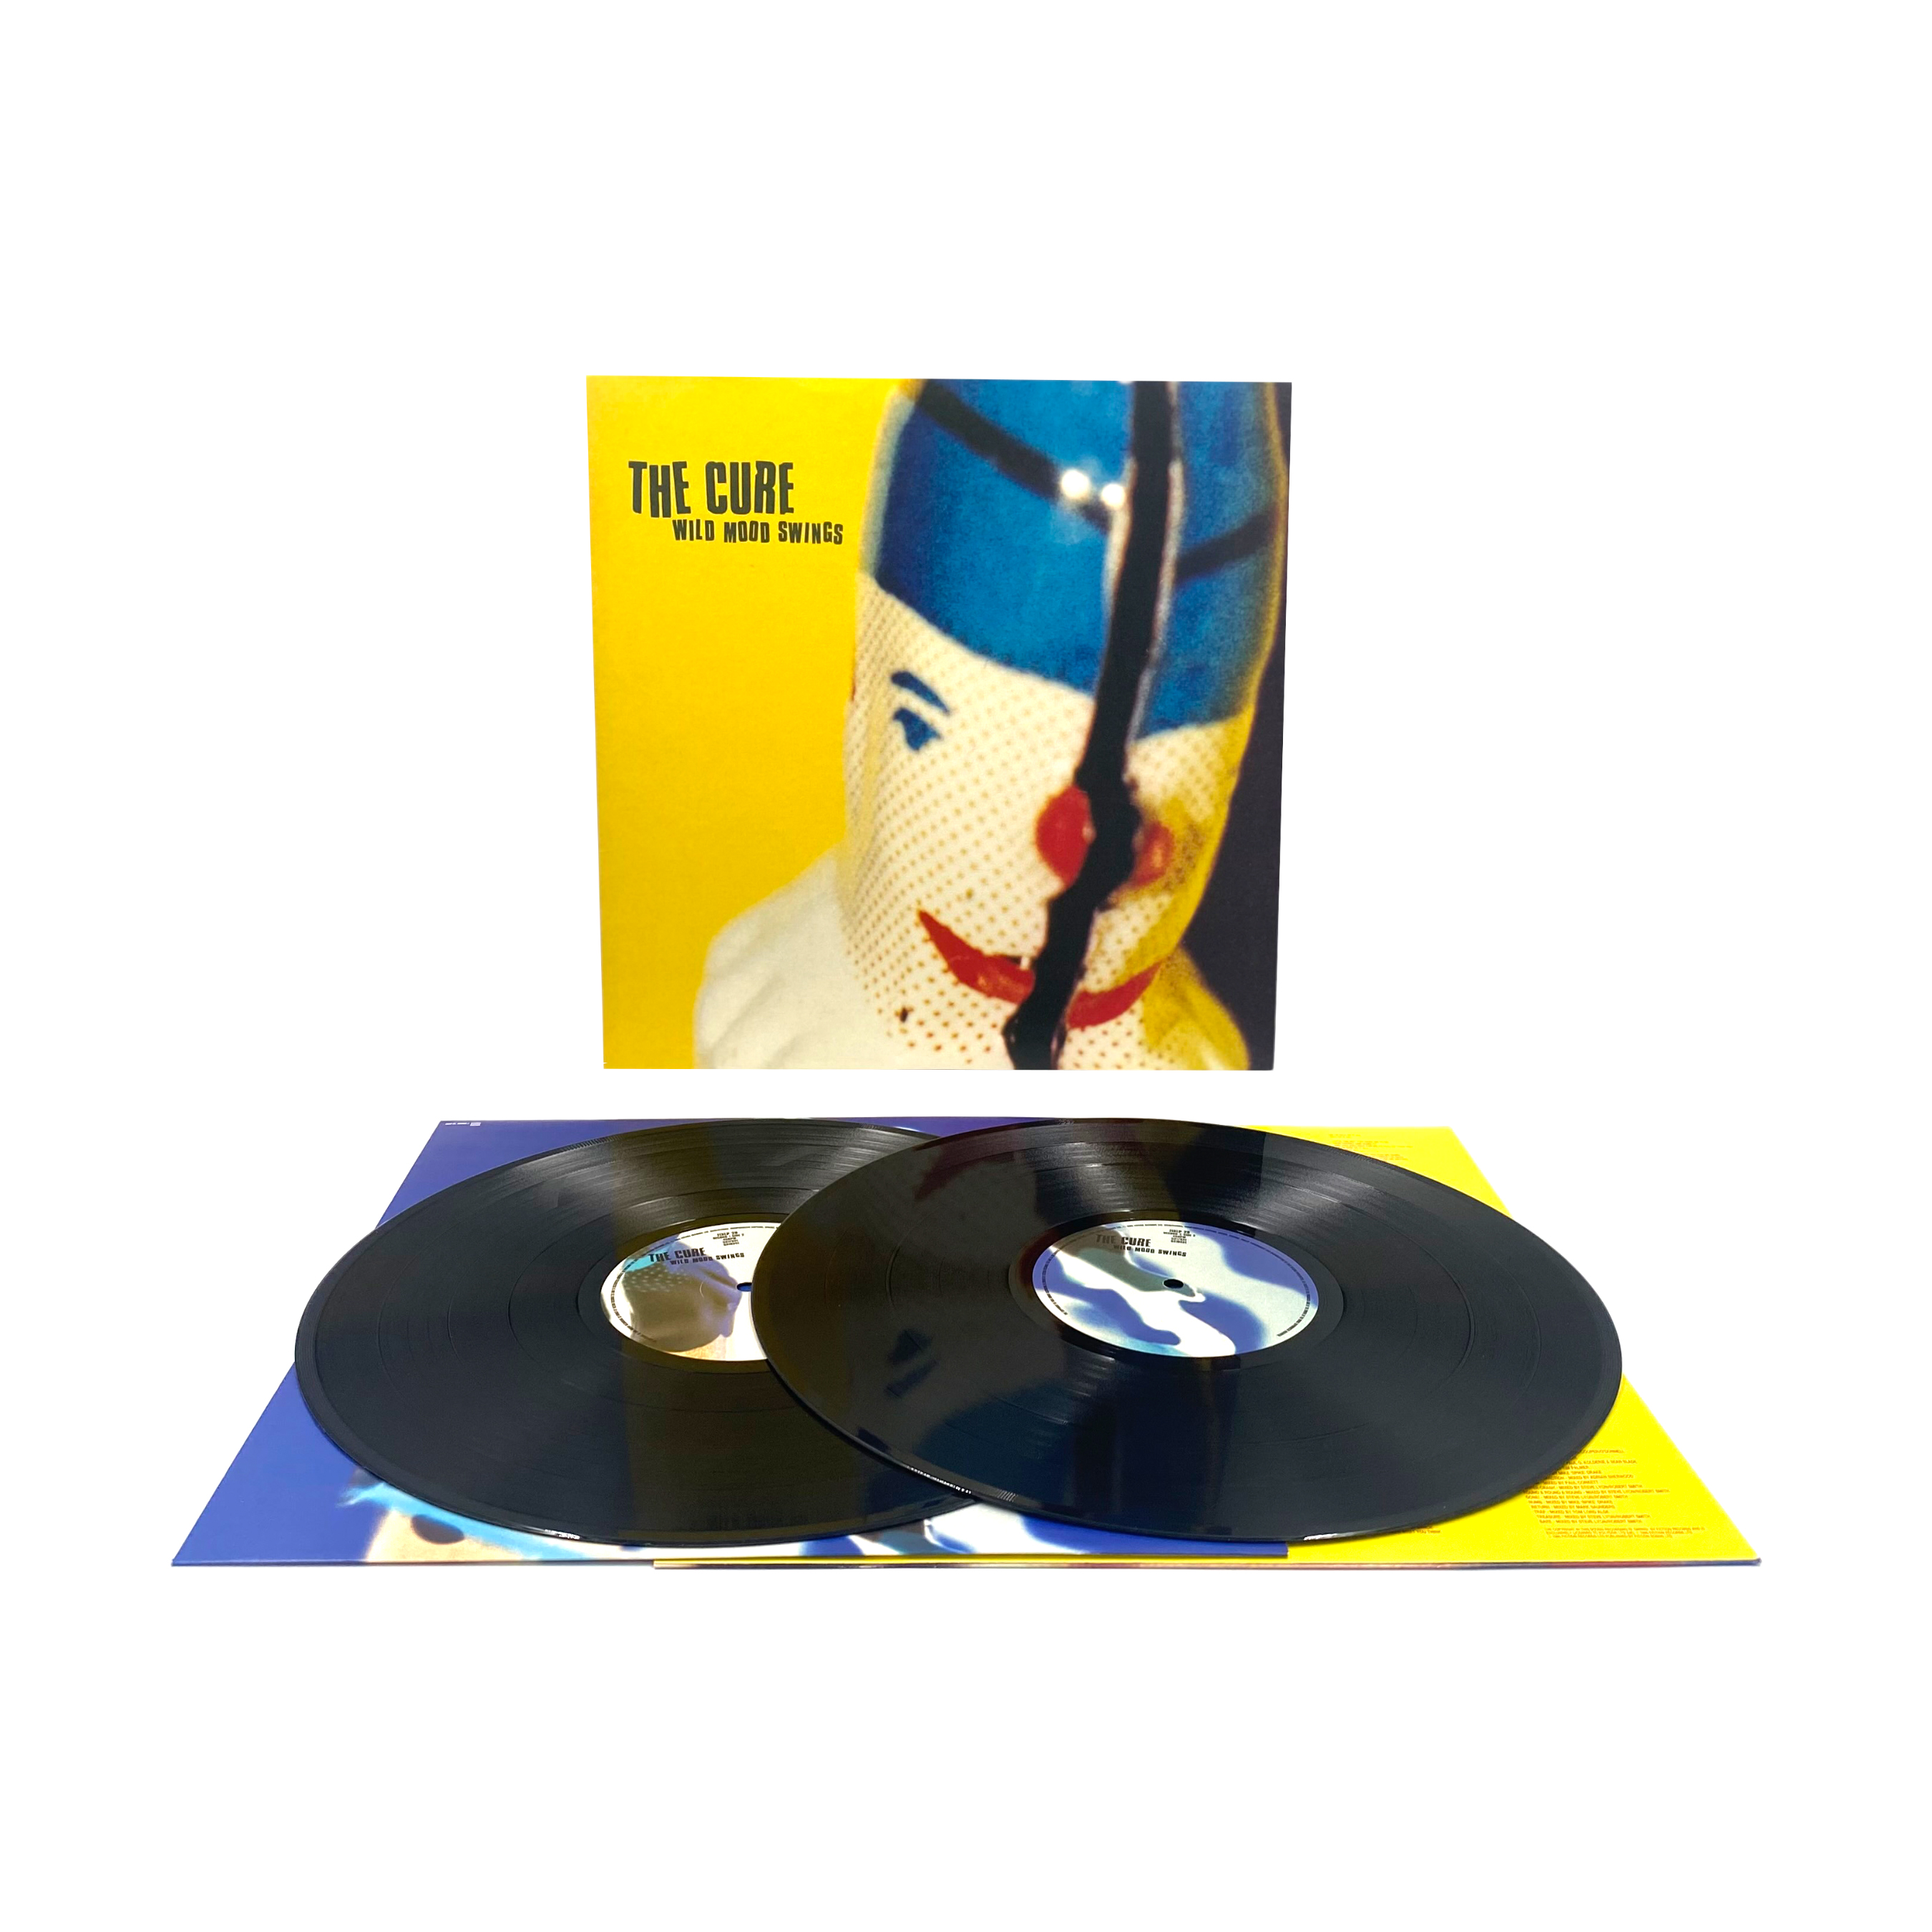 The Cure - Wild Mood Swings — buy vinyl records and accessories in